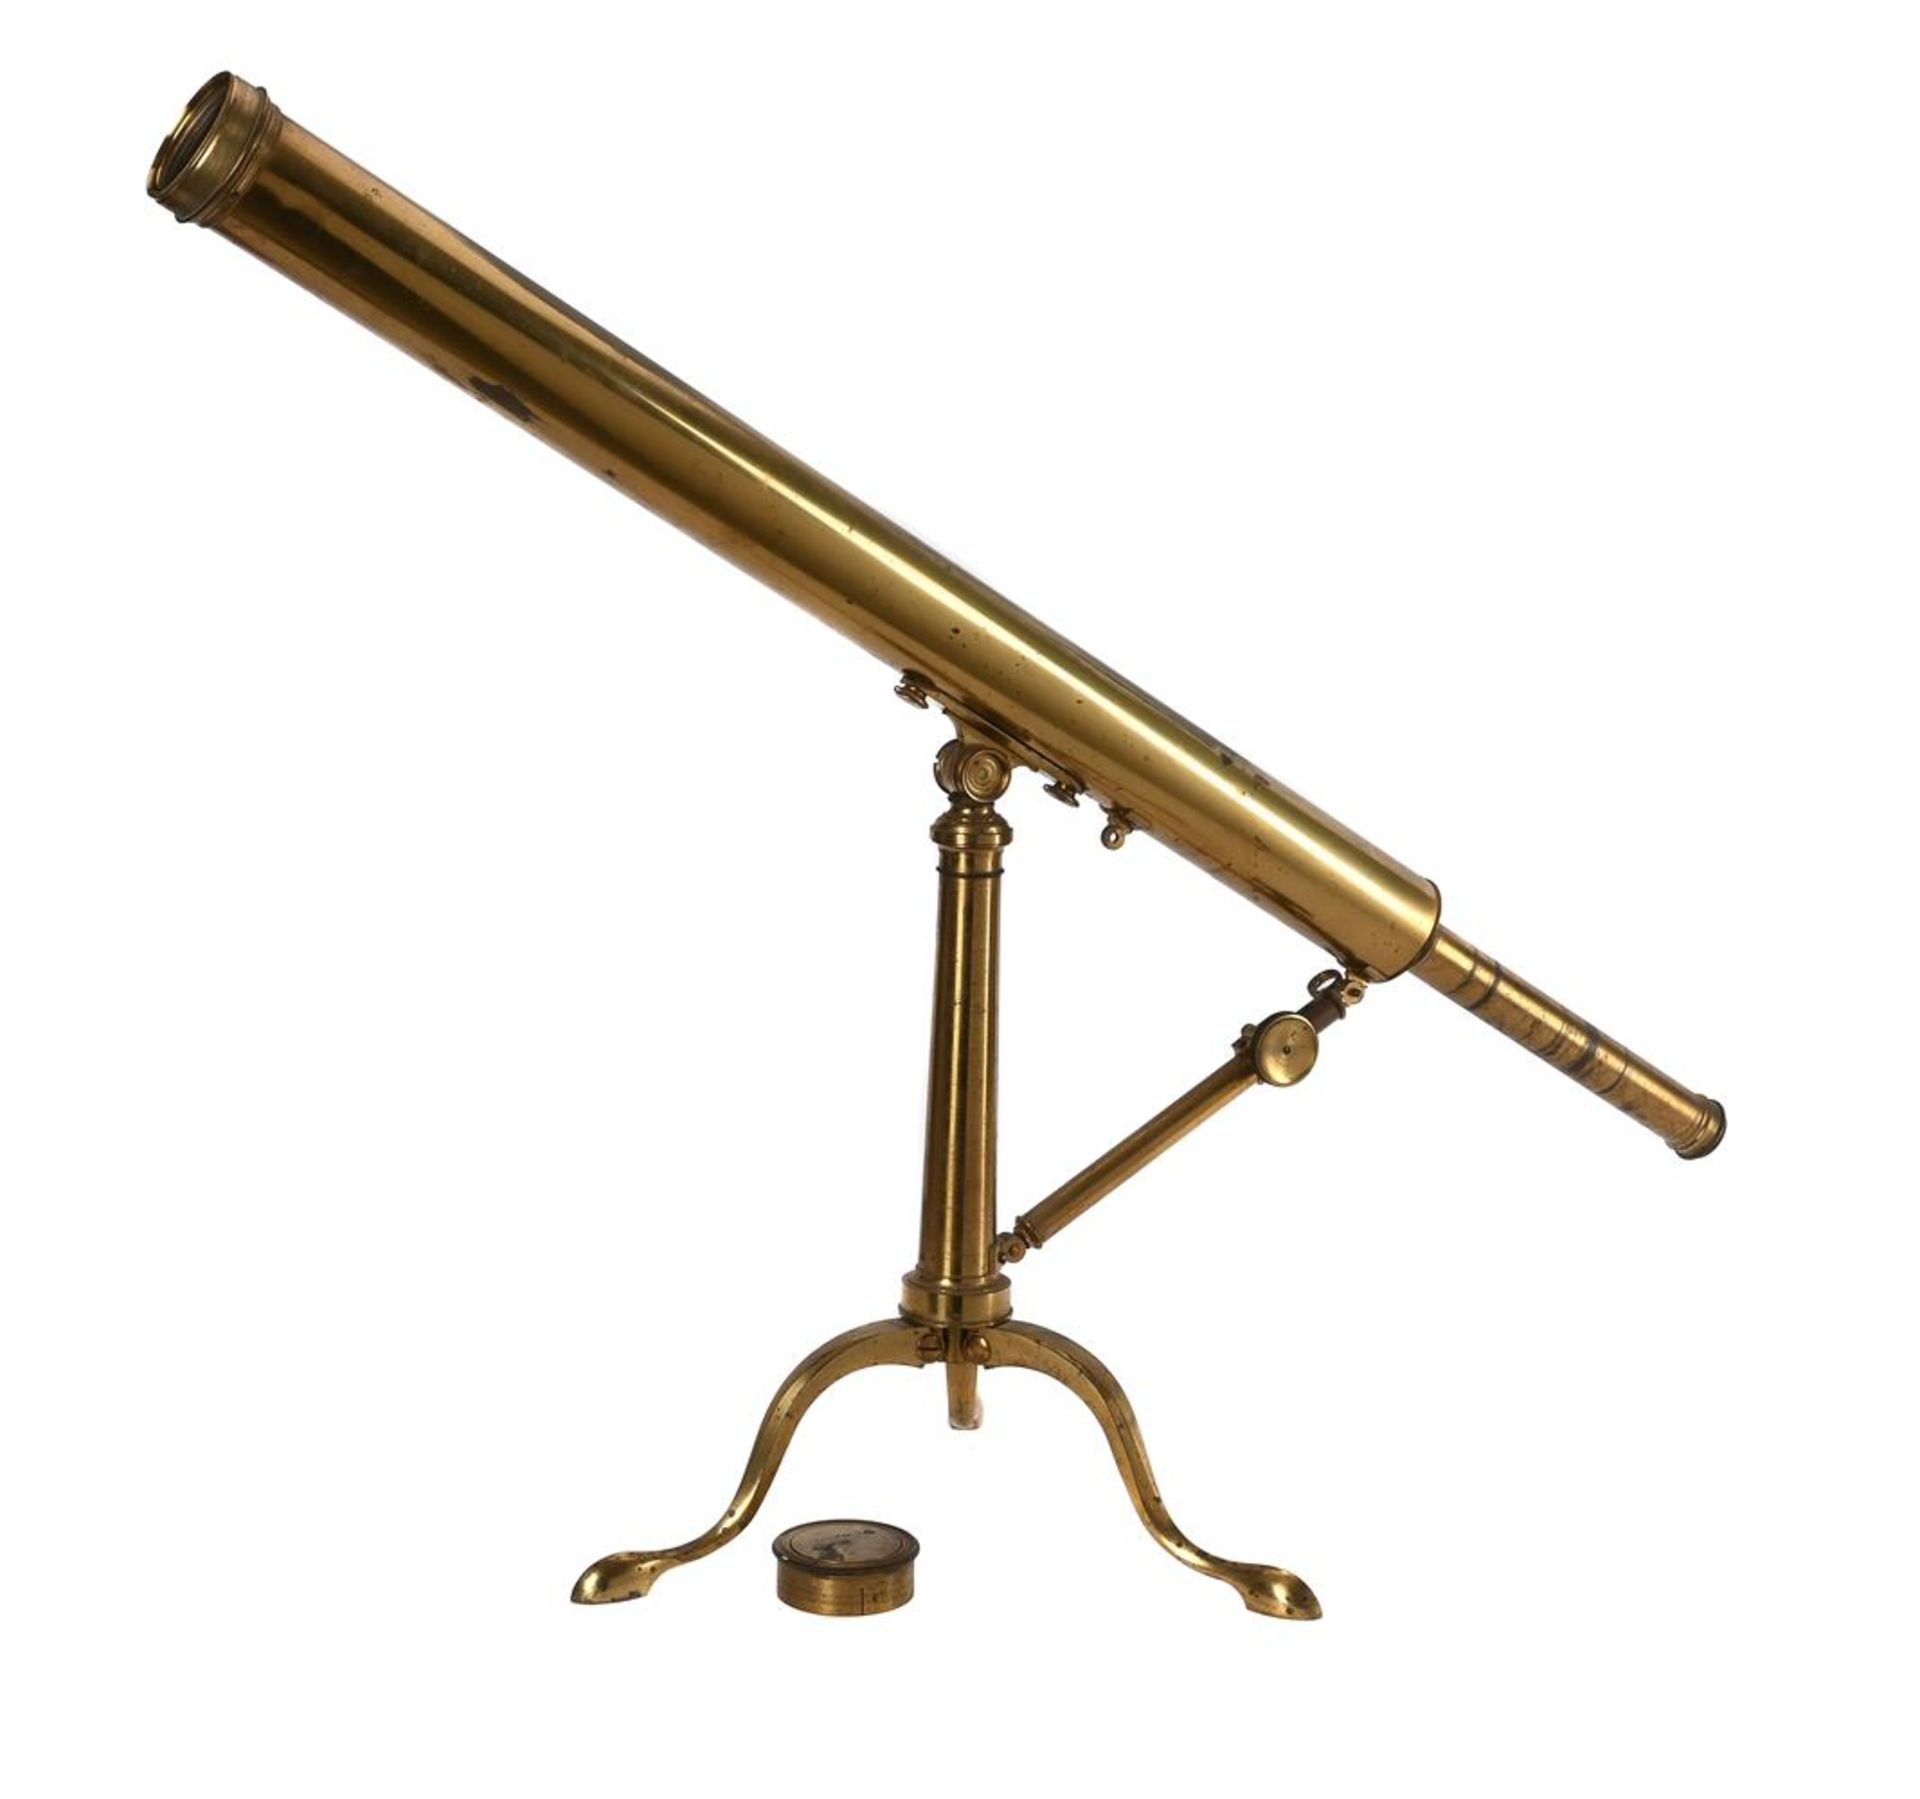 AN EARLY VICTORIAN LACQUERED BRASS TWO-INCH REFRACTING TELESCOPE